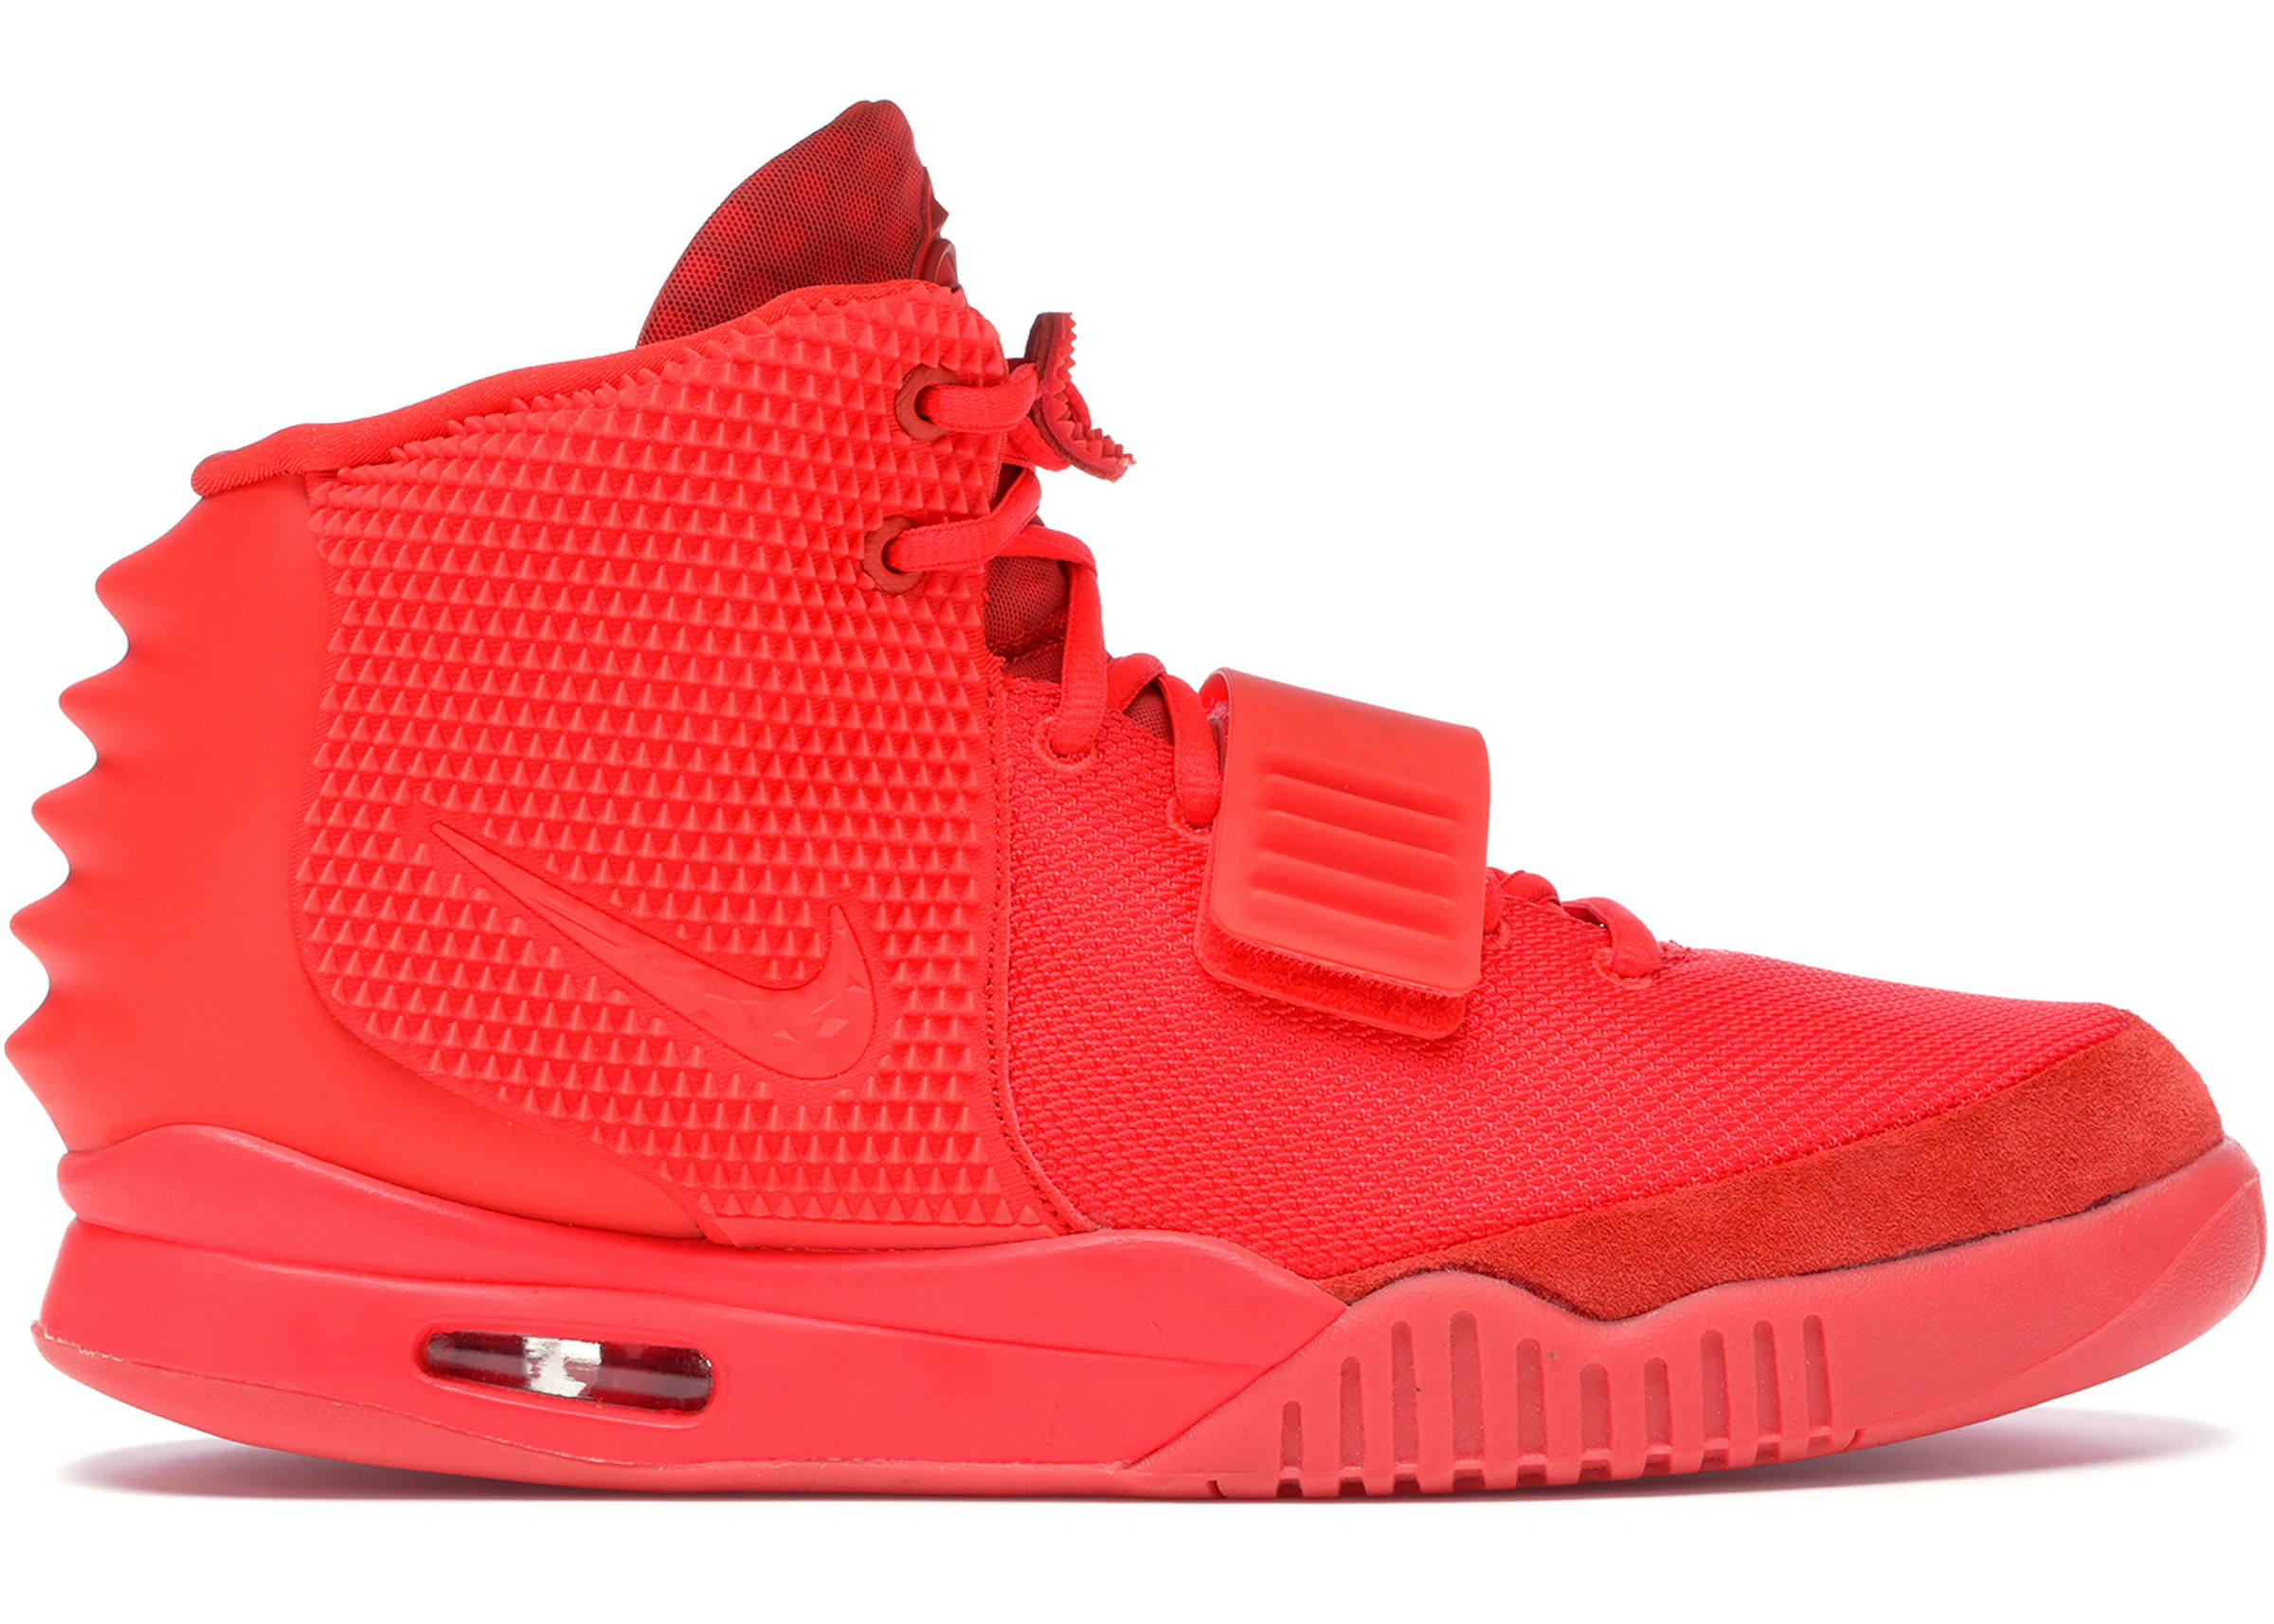 Nike Air Yeezy 2 Red October - 508214-660 - Us